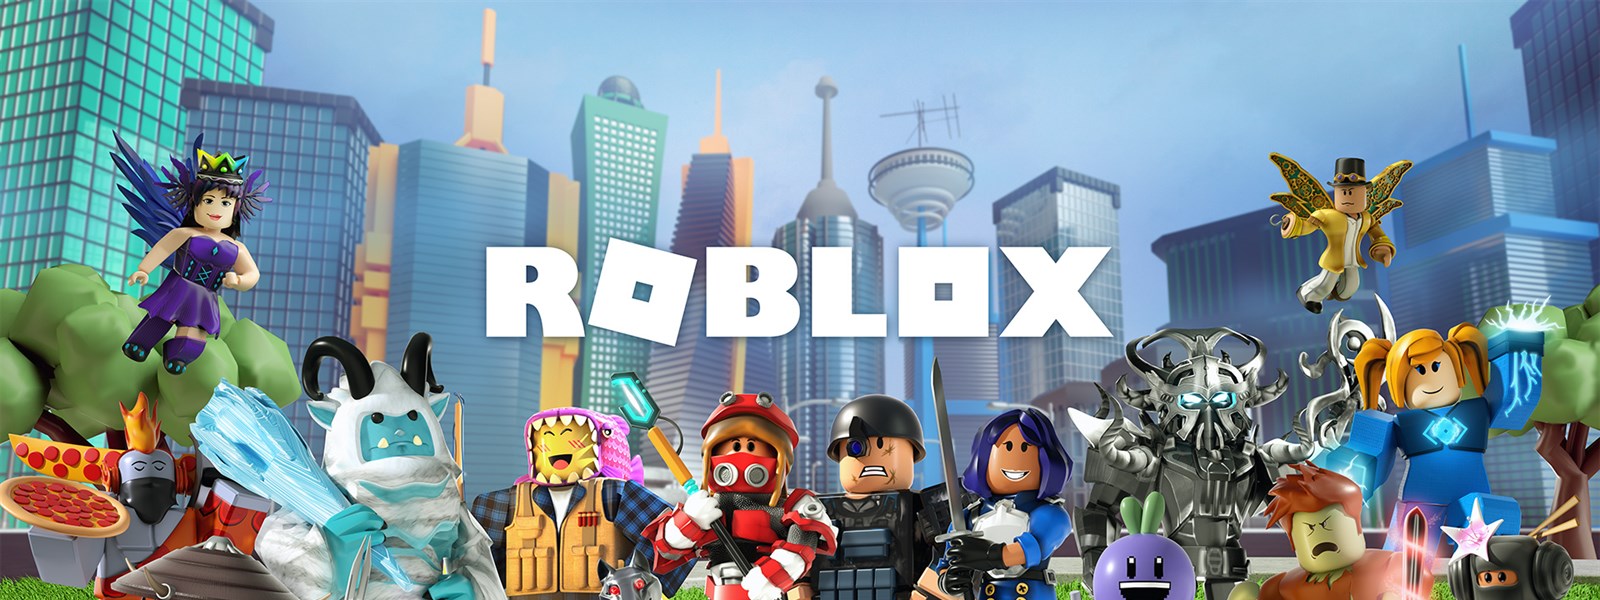 Windows Games Microsoft Store - roblox minion tycoon this is despicable